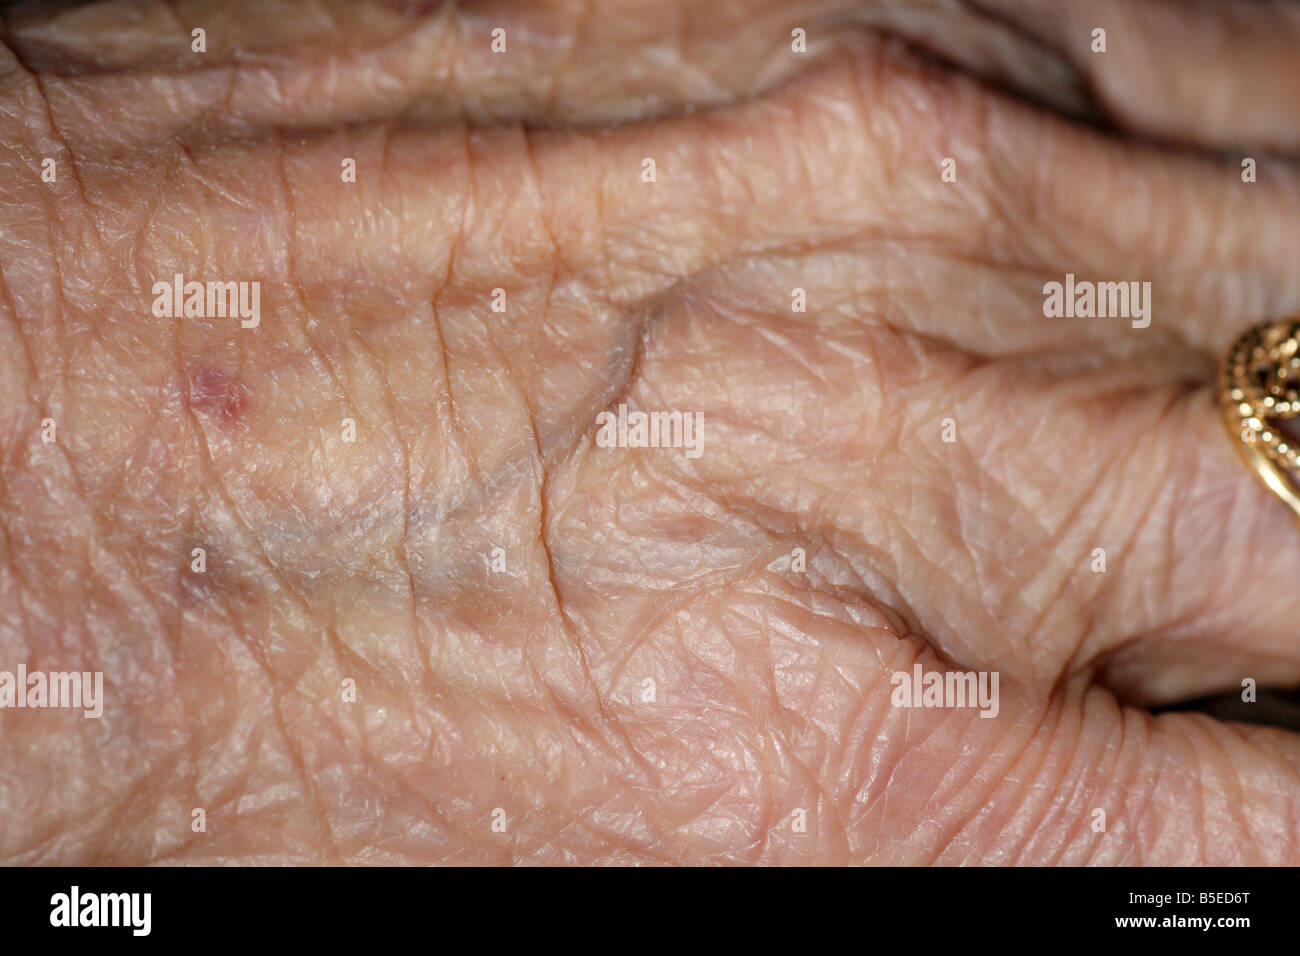 the skin on the hand of an elderly old woman Stock Photo